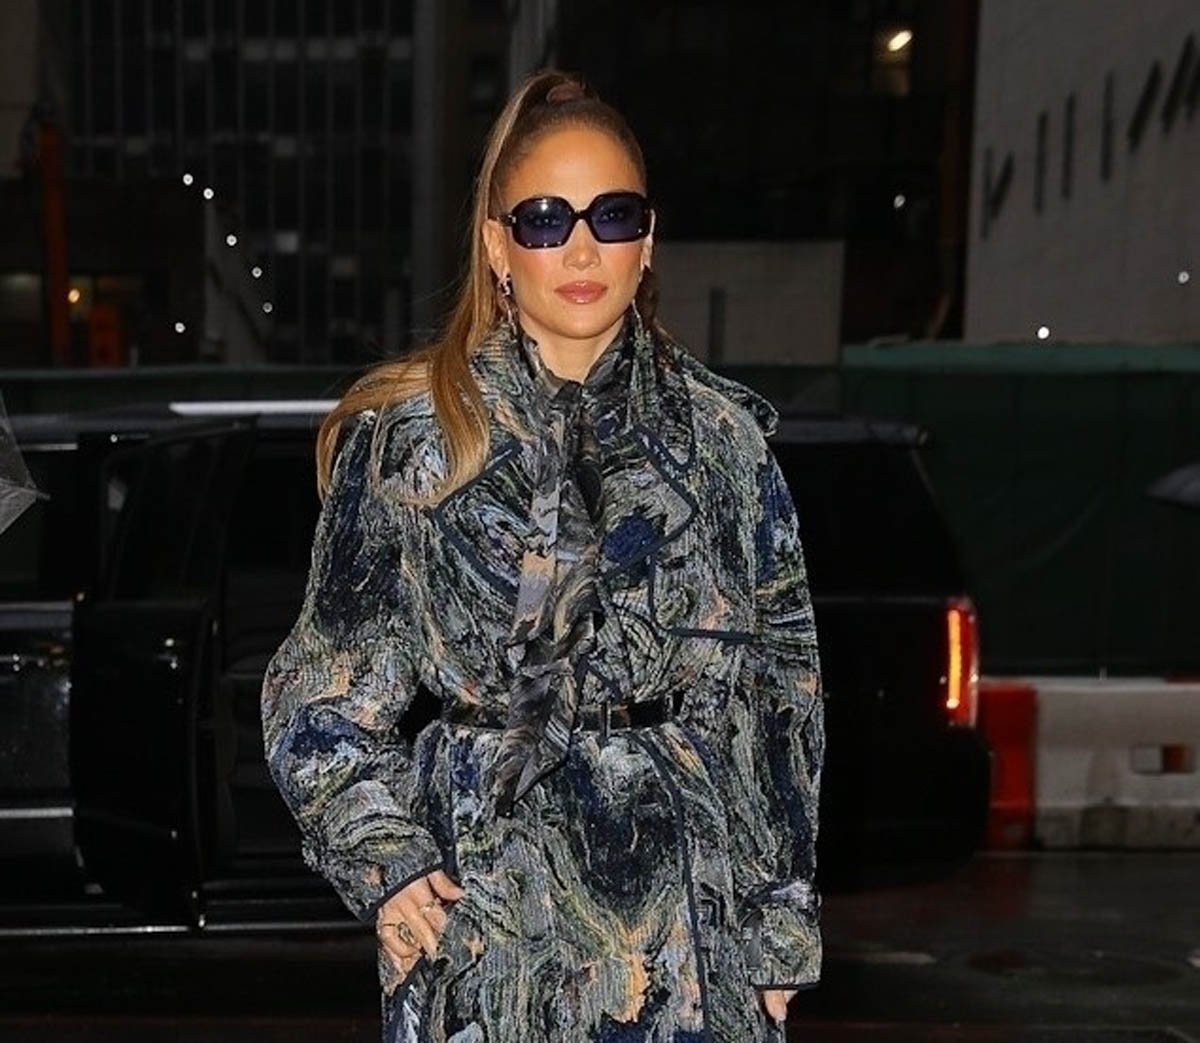 Jennifer Lopez showcases her professional skills as a celebrity in